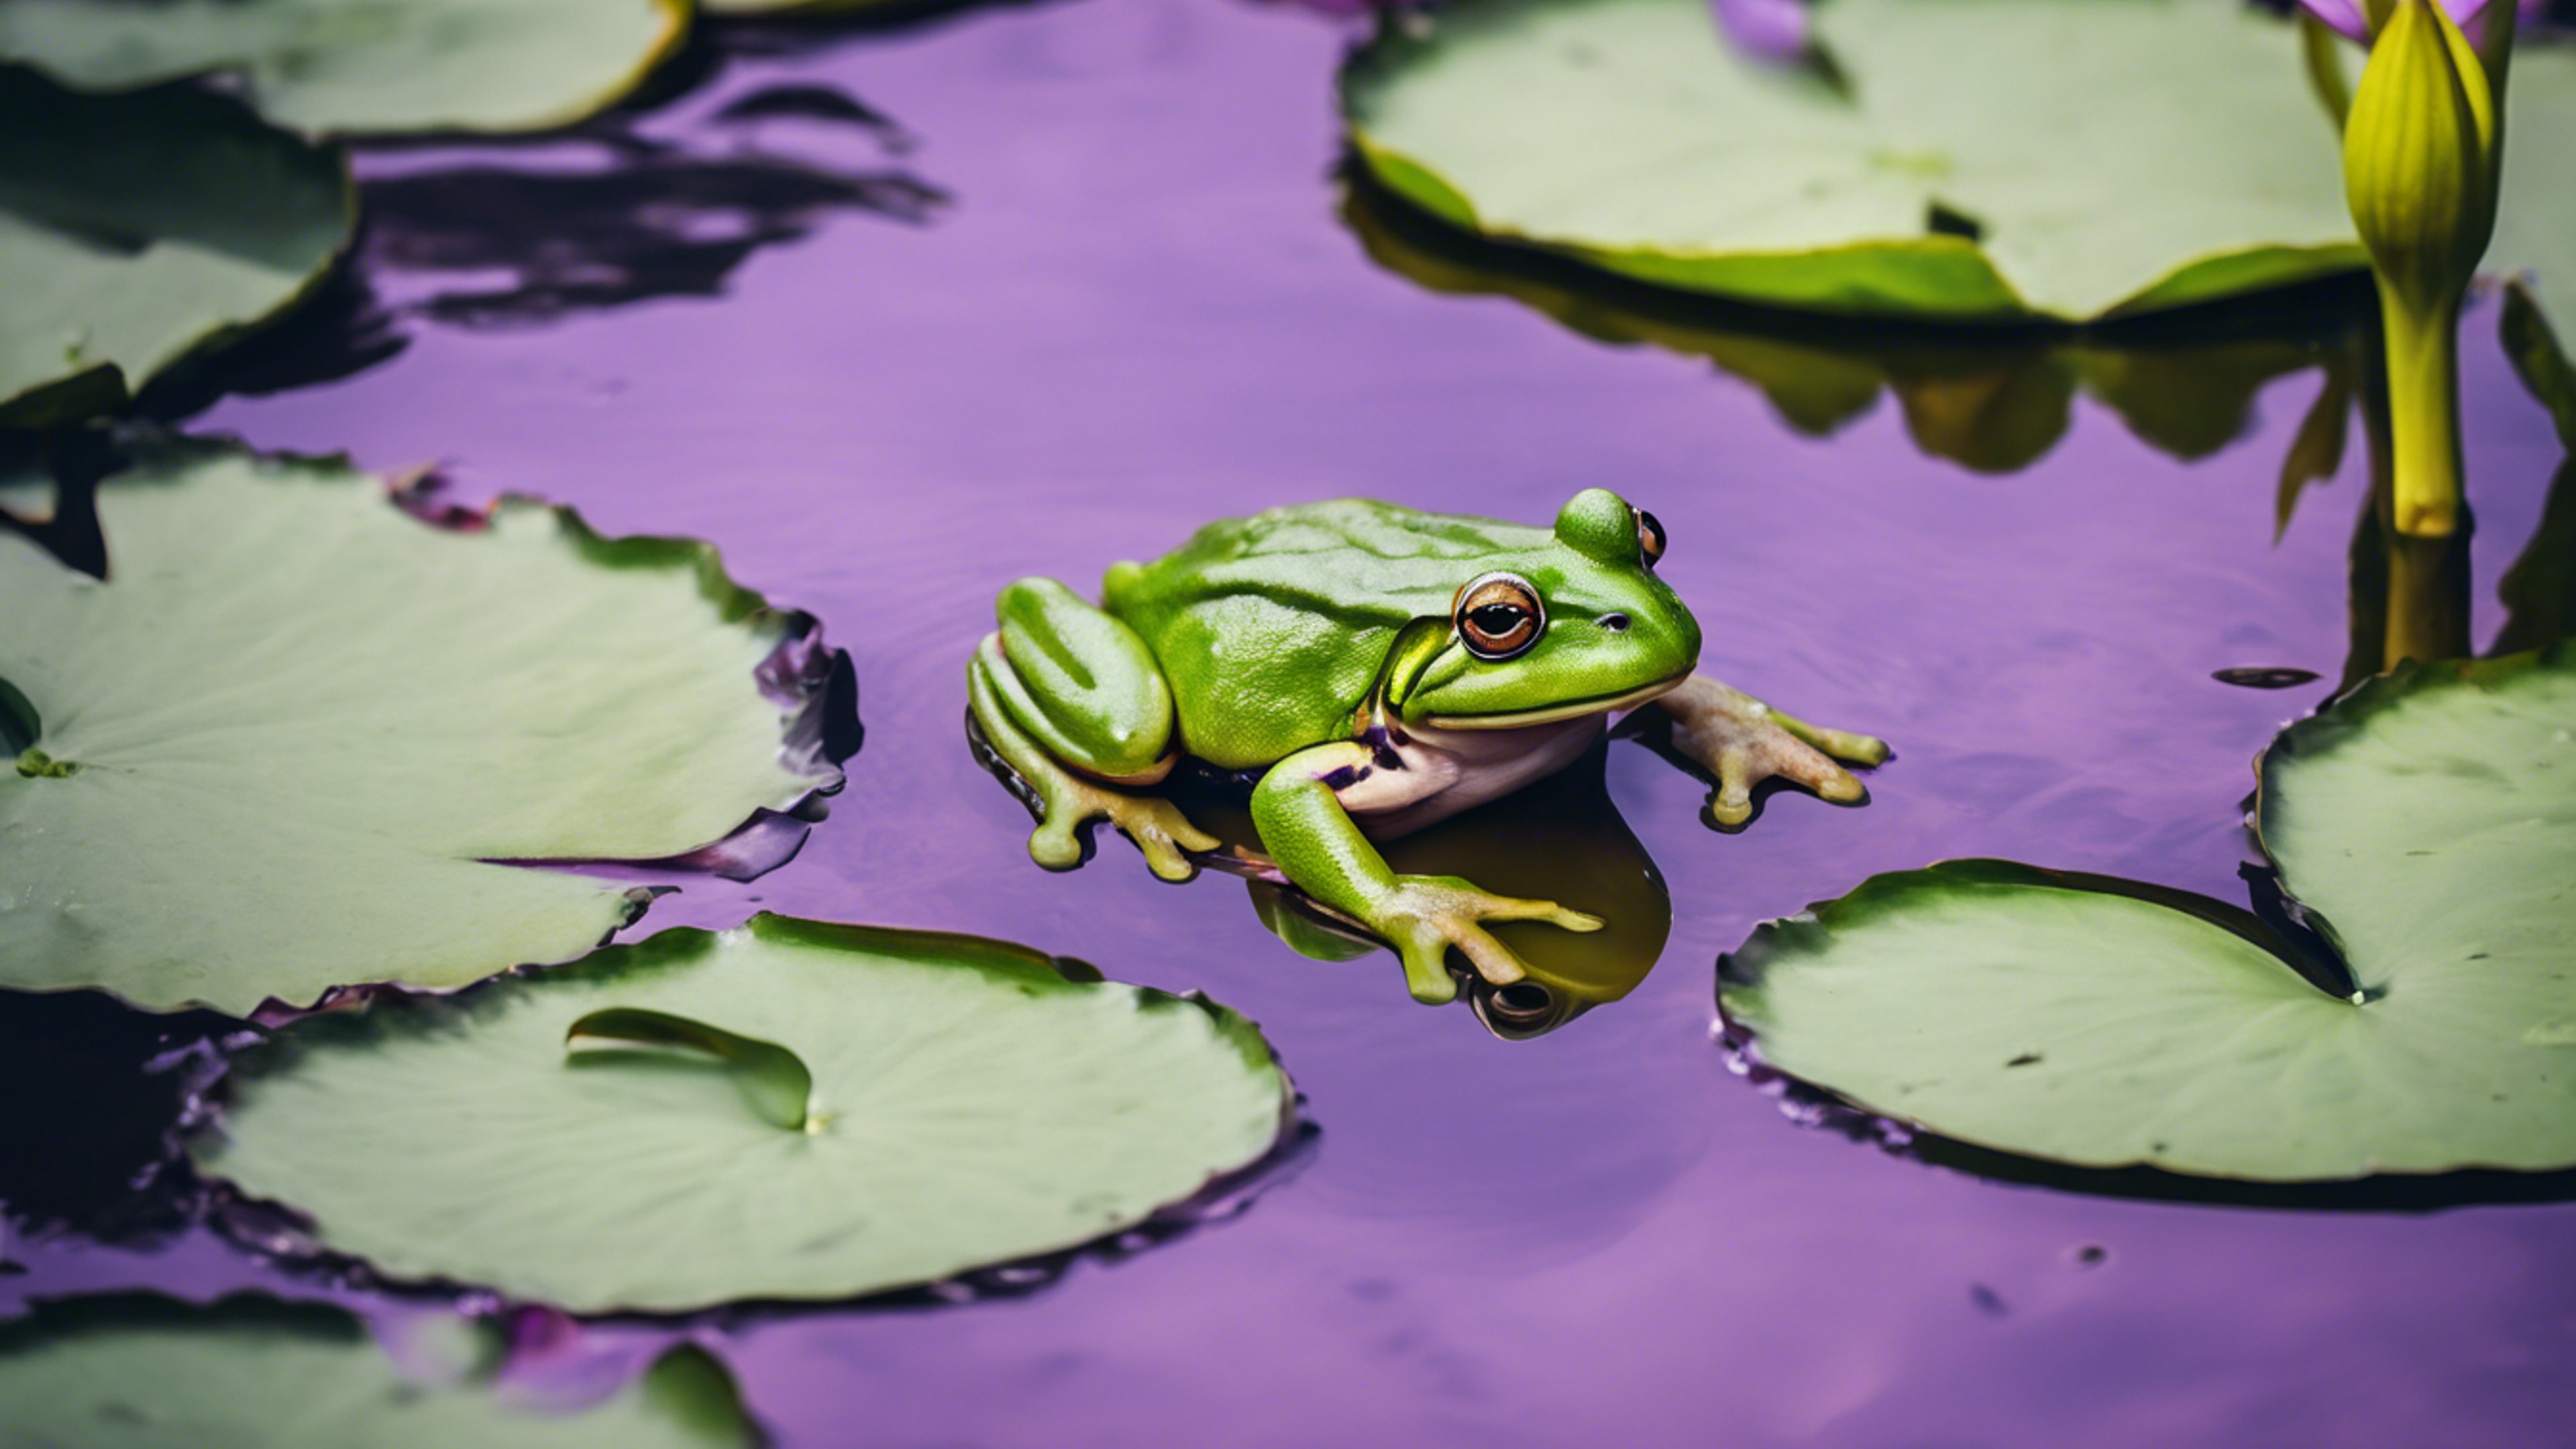 A green frog sitting on a lily pad in a pond with purple water lilies. ورق الجدران[d22beb1d3ca84401a5ac]